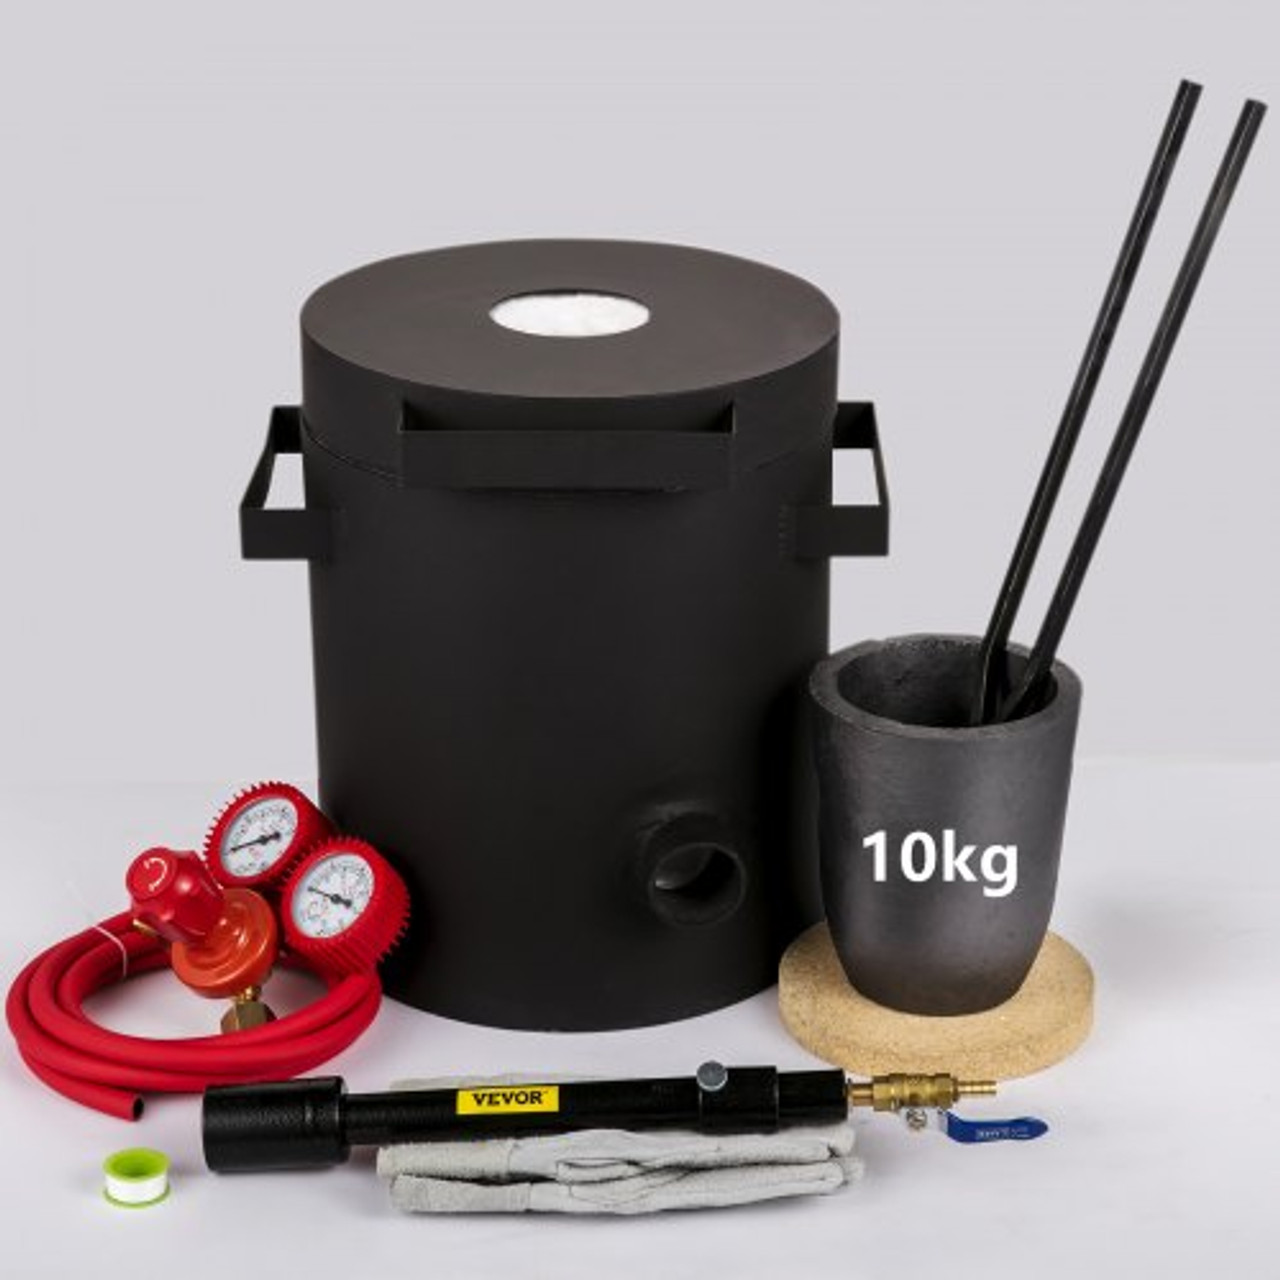 Propane Melting Furnace, 2462øF, 10 KG Metal Foundry Furnace Kit with Graphite Crucible and Tongs, Casting Melting Smelting Refining Precious Metals Like Gold Silver Aluminum Copper Brass Bronze